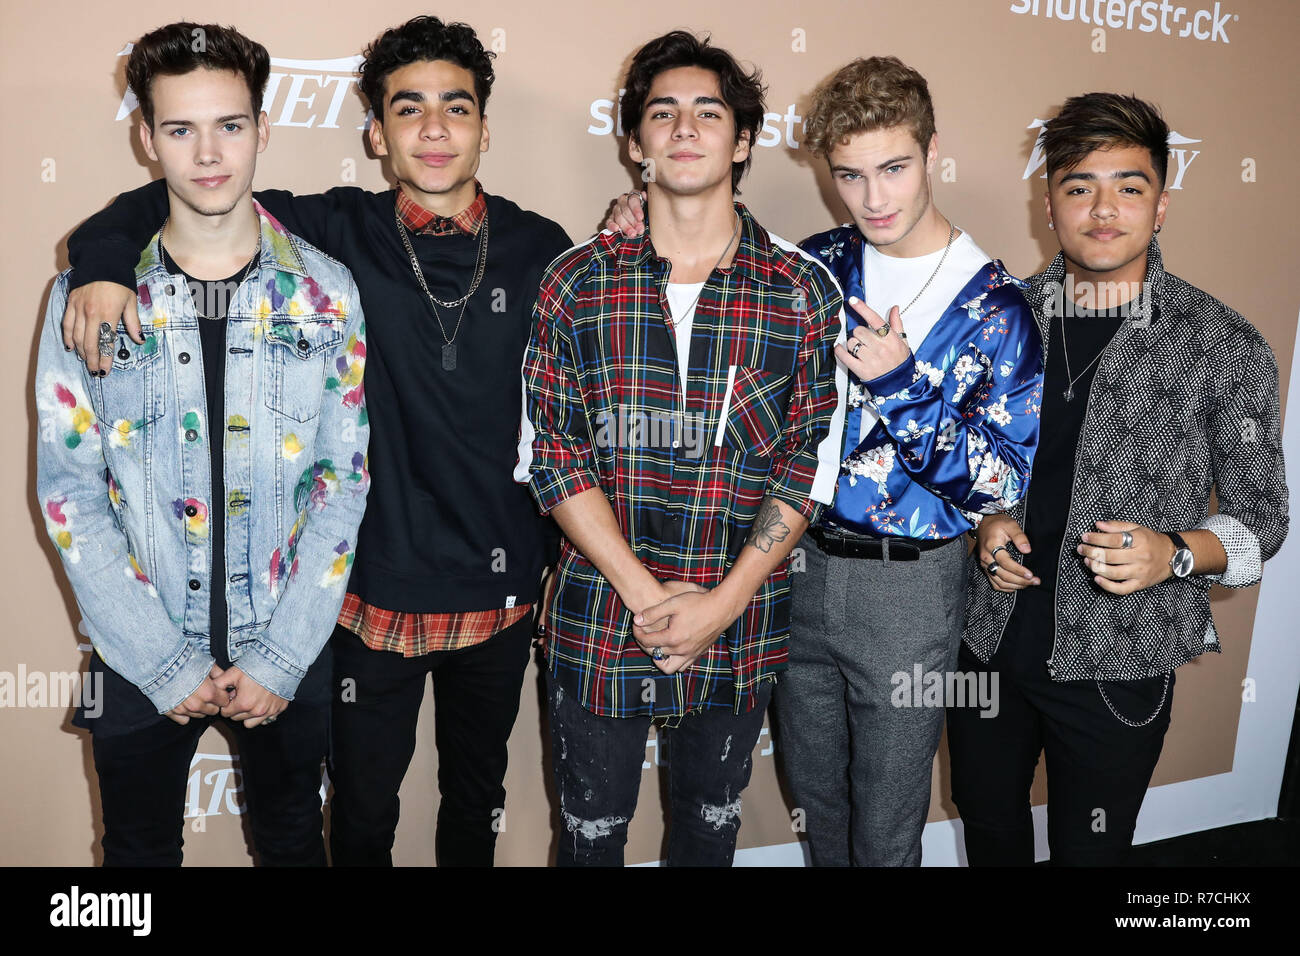 WEST HOLLYWOOD, LOS ANGELES, CA, USA - DECEMBER 01: Brady Tutton, Chance Perez, Drew Ramos, Sergio Calderon, Michael Conor, In Real Life arrive at the 2nd Annual Variety Hitmakers Brunch held at the Sunset Tower Hotel on December 1, 2018 in West Hollywood, Los Angeles, California, United States. (Photo by Xavier Collin/Image Press Agency) Stock Photo